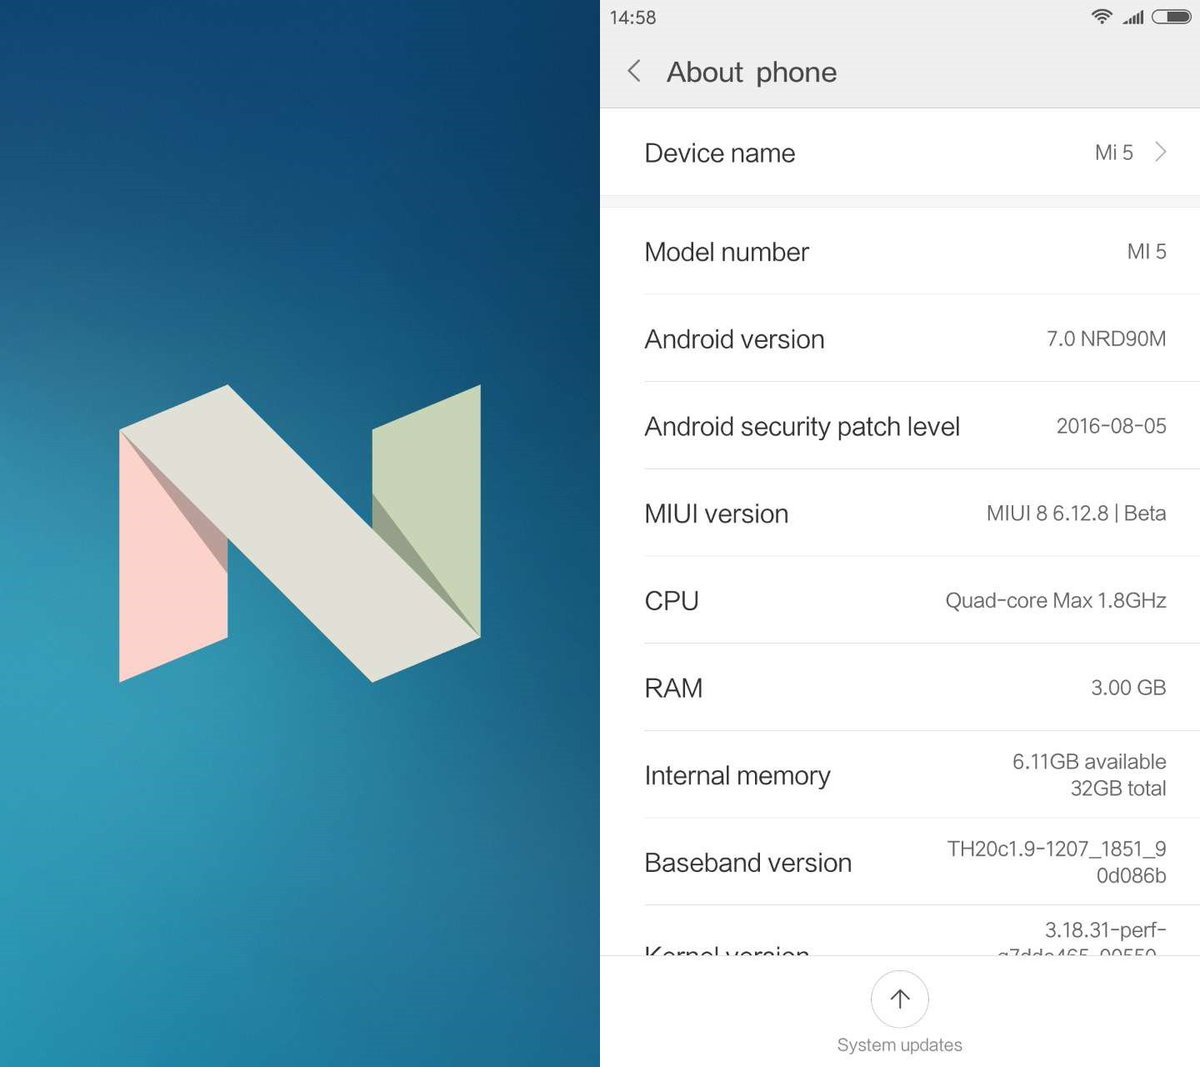 Miui Miui 8 China Developer Rom 6 12 8 Based On Android 7 0 For Mi 5 Has Been Released Download Here T Co Clga8jmrye T Co Yspeg12gyx